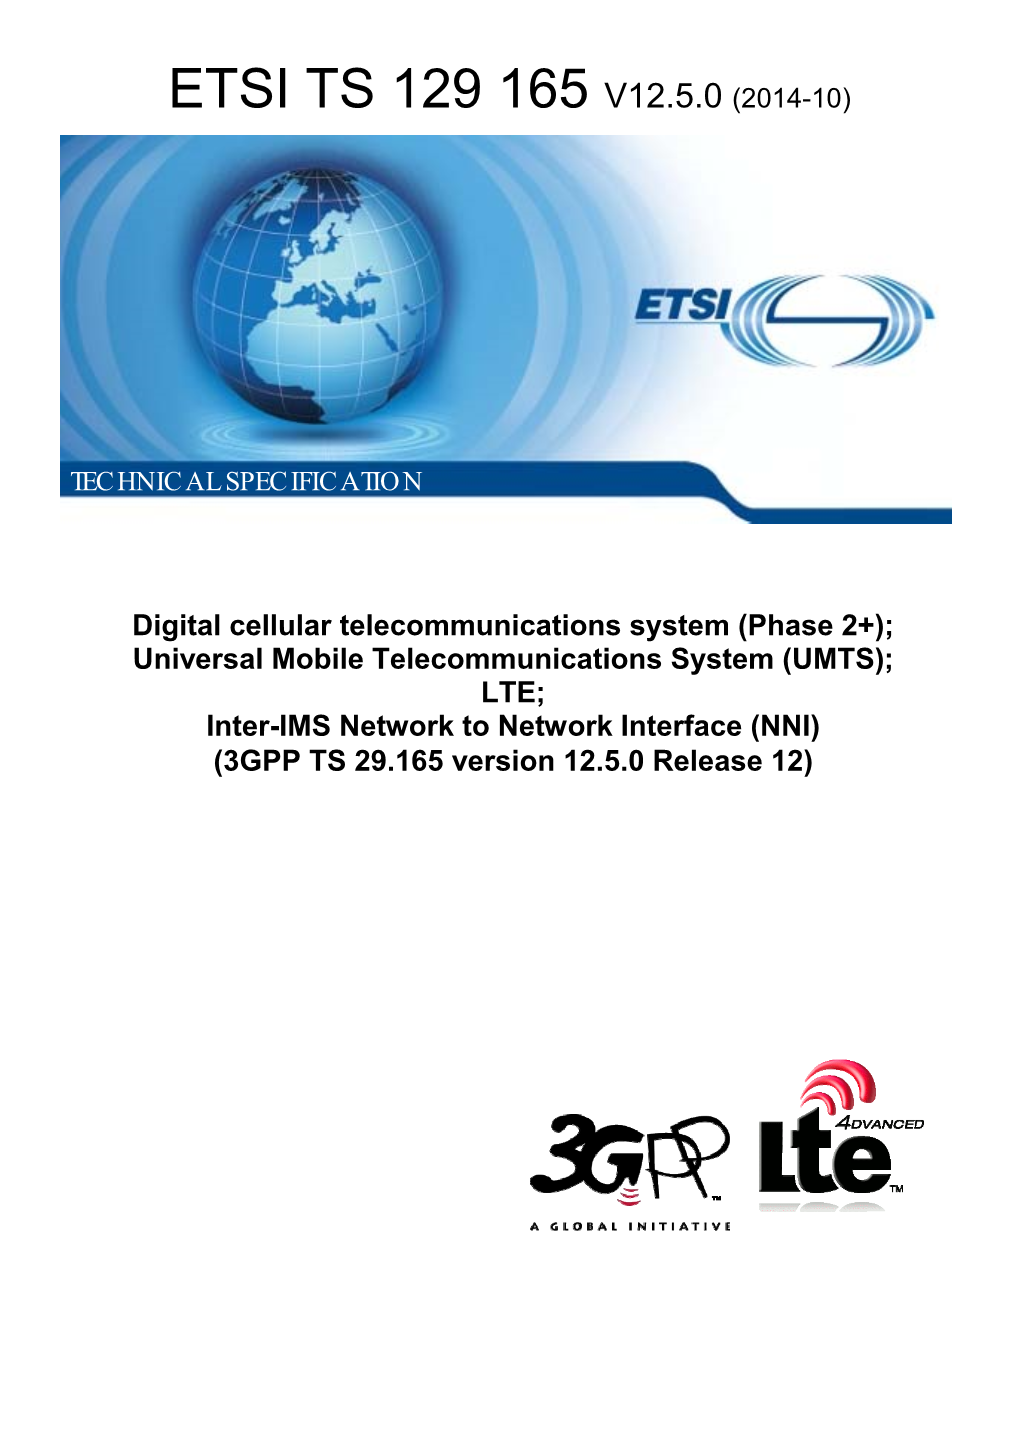 UMTS); LTE; Inter-IMS Network to Network Interface (NNI) (3GPP TS 29.165 Version 12.5.0 Release 12)